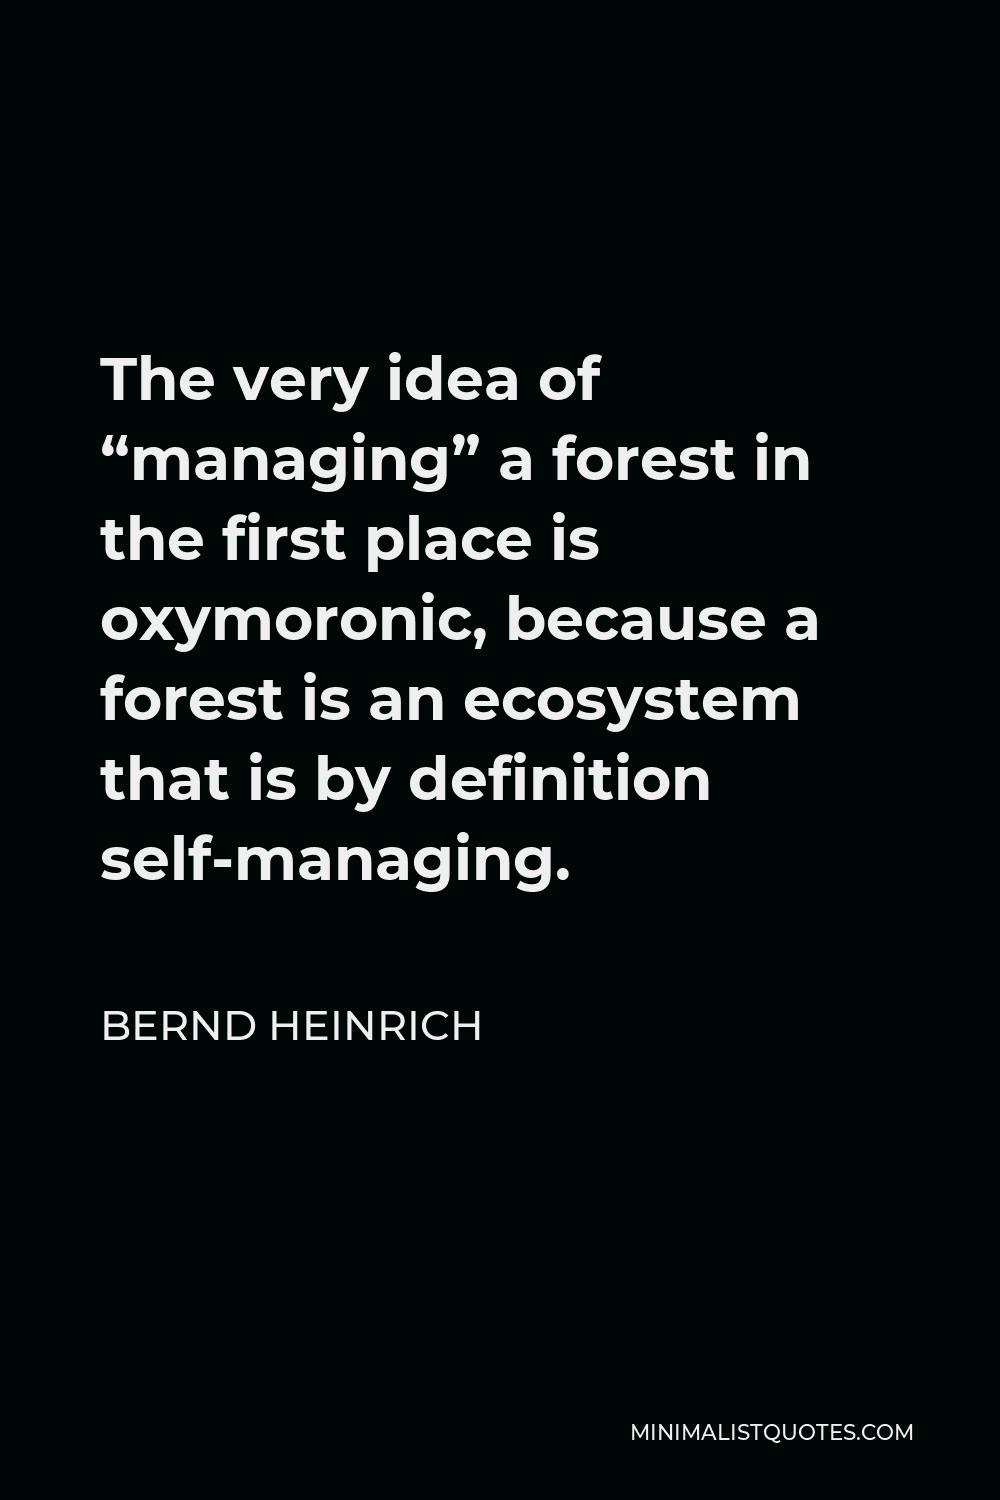 Bernd Heinrich Quote - The very idea of “managing” a forest in the first place is oxymoronic, because a forest is an ecosystem that is by definition self-managing.